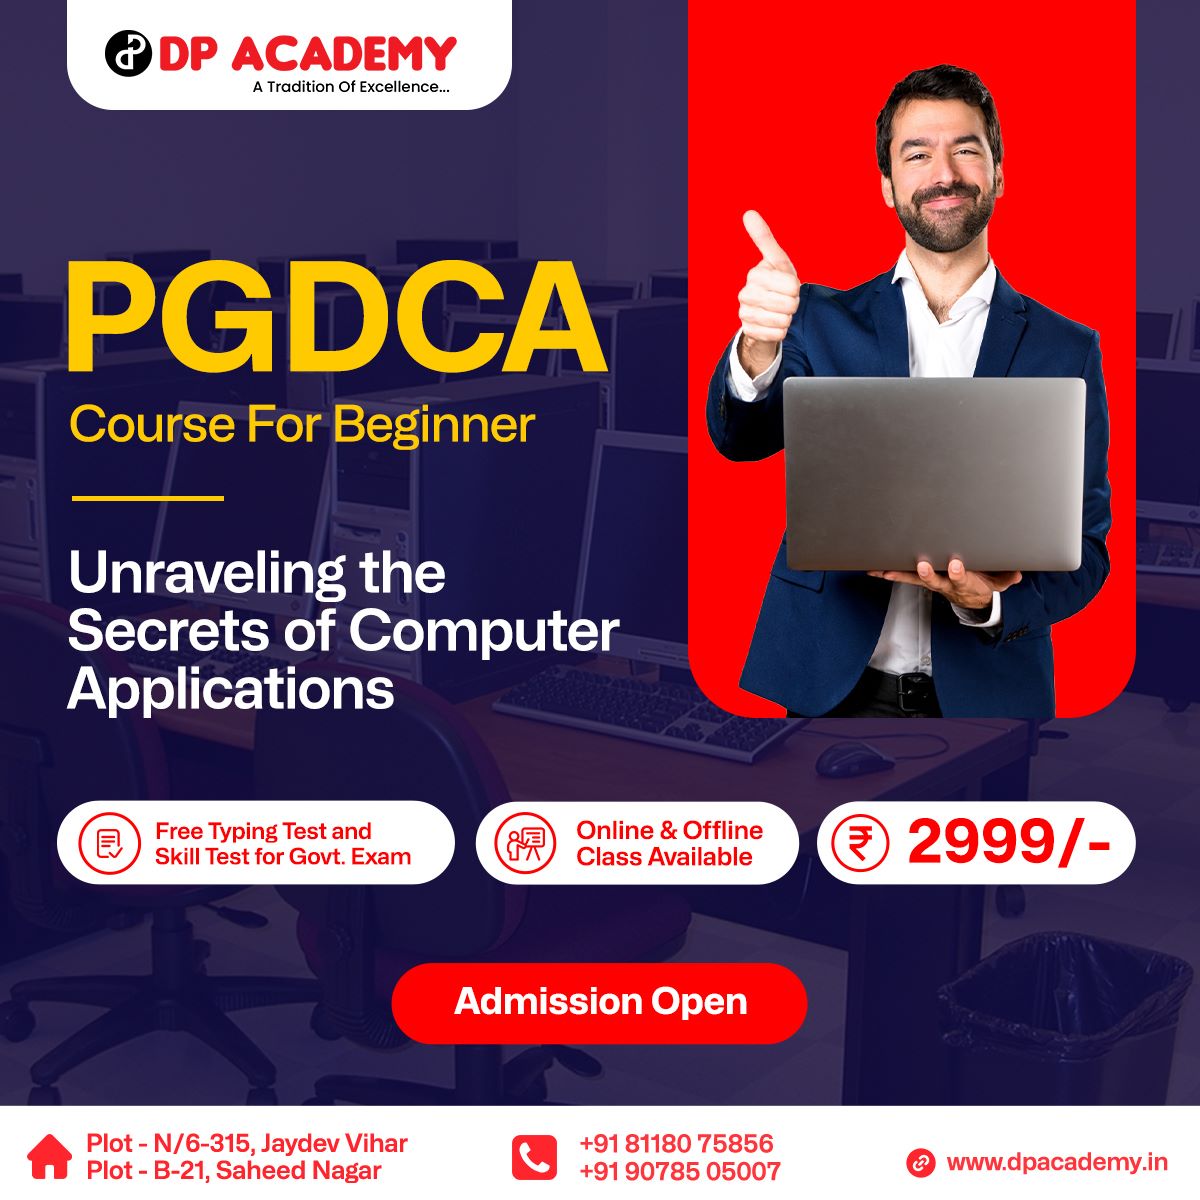 PGDCA Course for Beginners!

Unraveling the Secrets of Computer Applications.

Free typing Test and Skill Test for Govt. Exam.

Mobile No: +91 8118075856, +91 9078505007
Website: dpacademy.in

#dpacademy #PGDCA #pgdcacourse #computerapplication #govtexam #skills